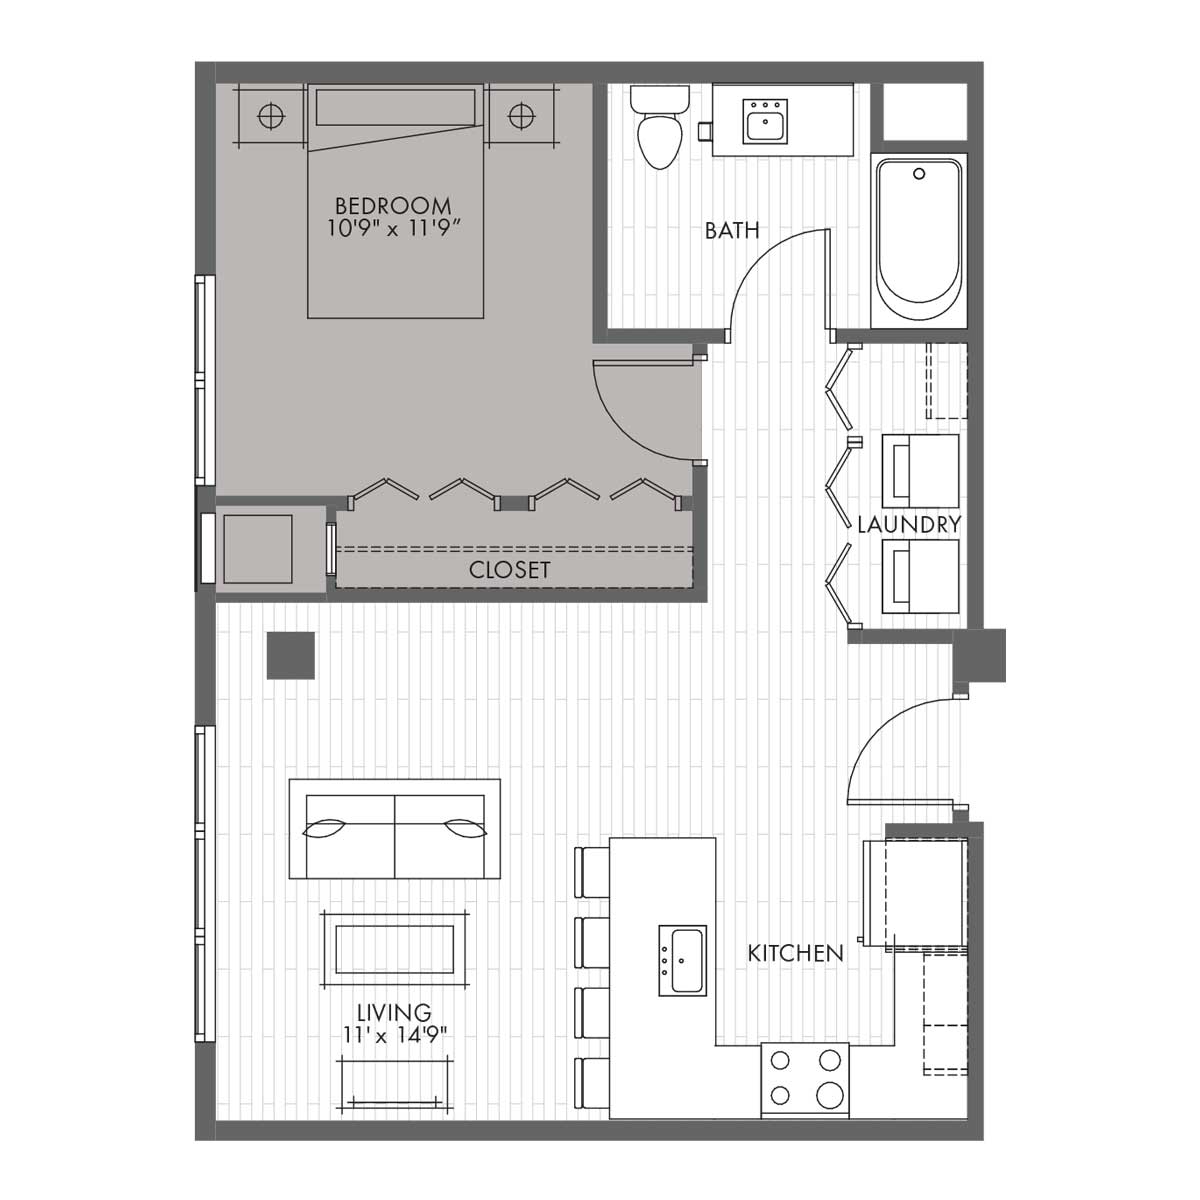 1 Bedroom Apartment House Plans - Garage and Bedroom Image